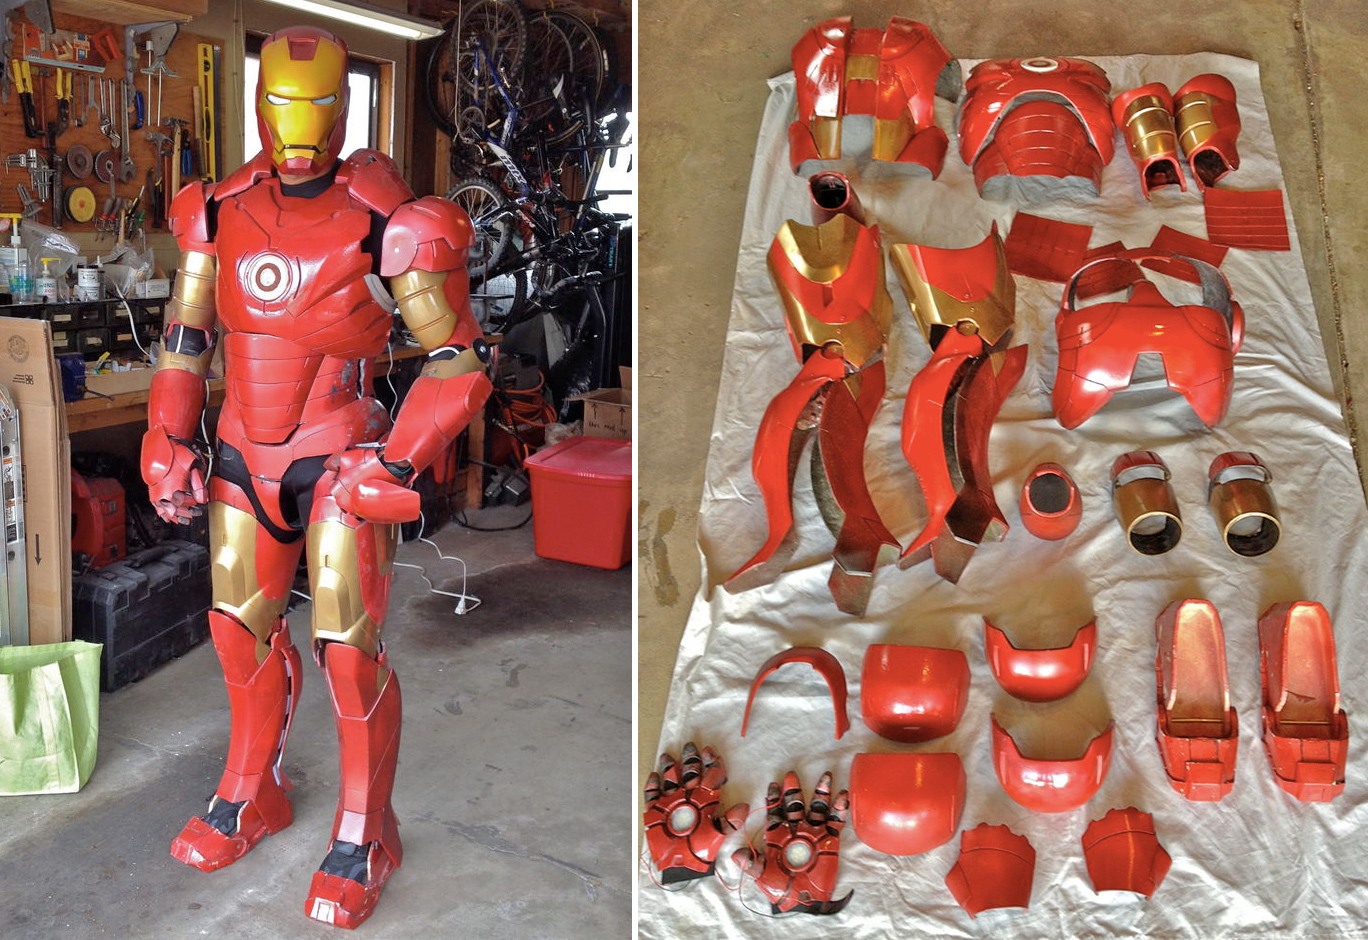 Endless Animated Features Make This The Best Amateur Iron Man Suit Yet